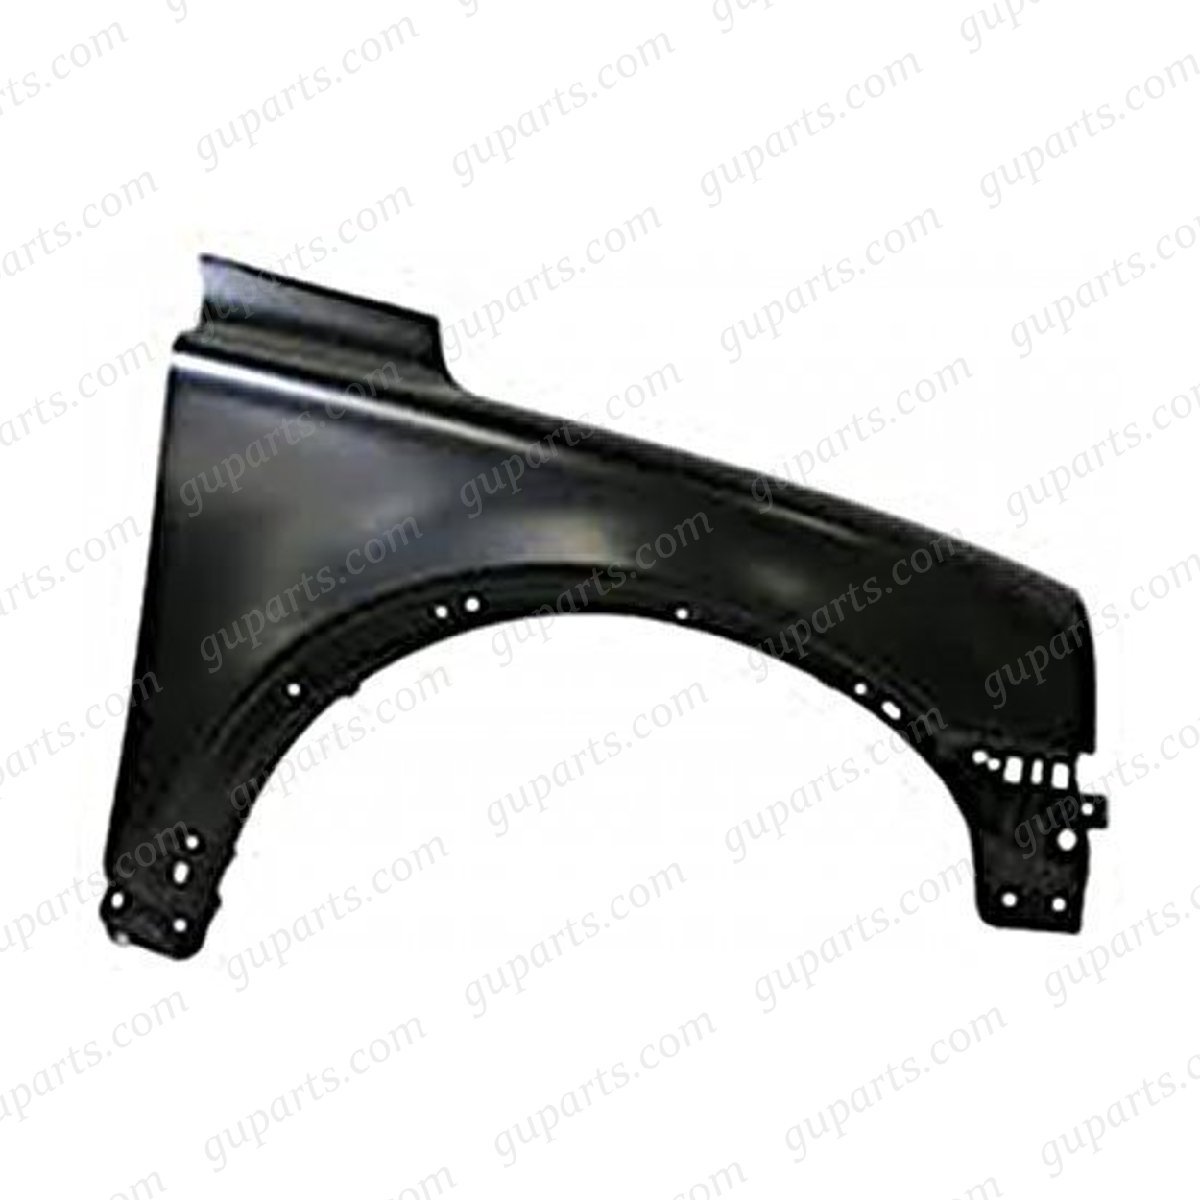 VOLVO XC90 CB5254AW CB8444AW CB6324AW CB6294AW 2003~2014 right front fender turn signal hole less 30796495